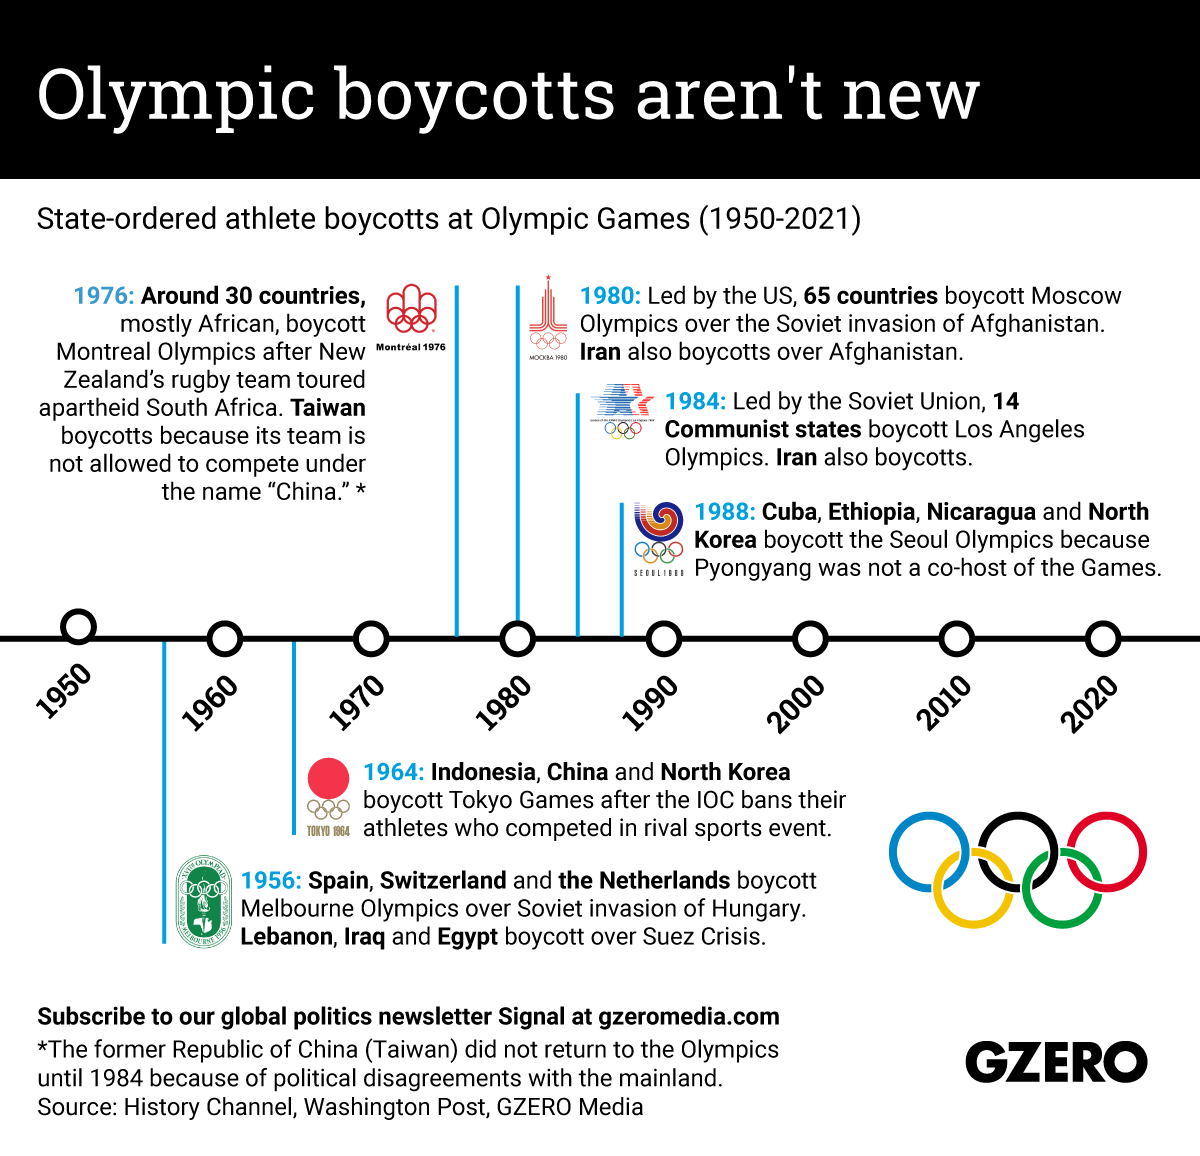 The Graphic Truth: Olympic boycotts aren't new